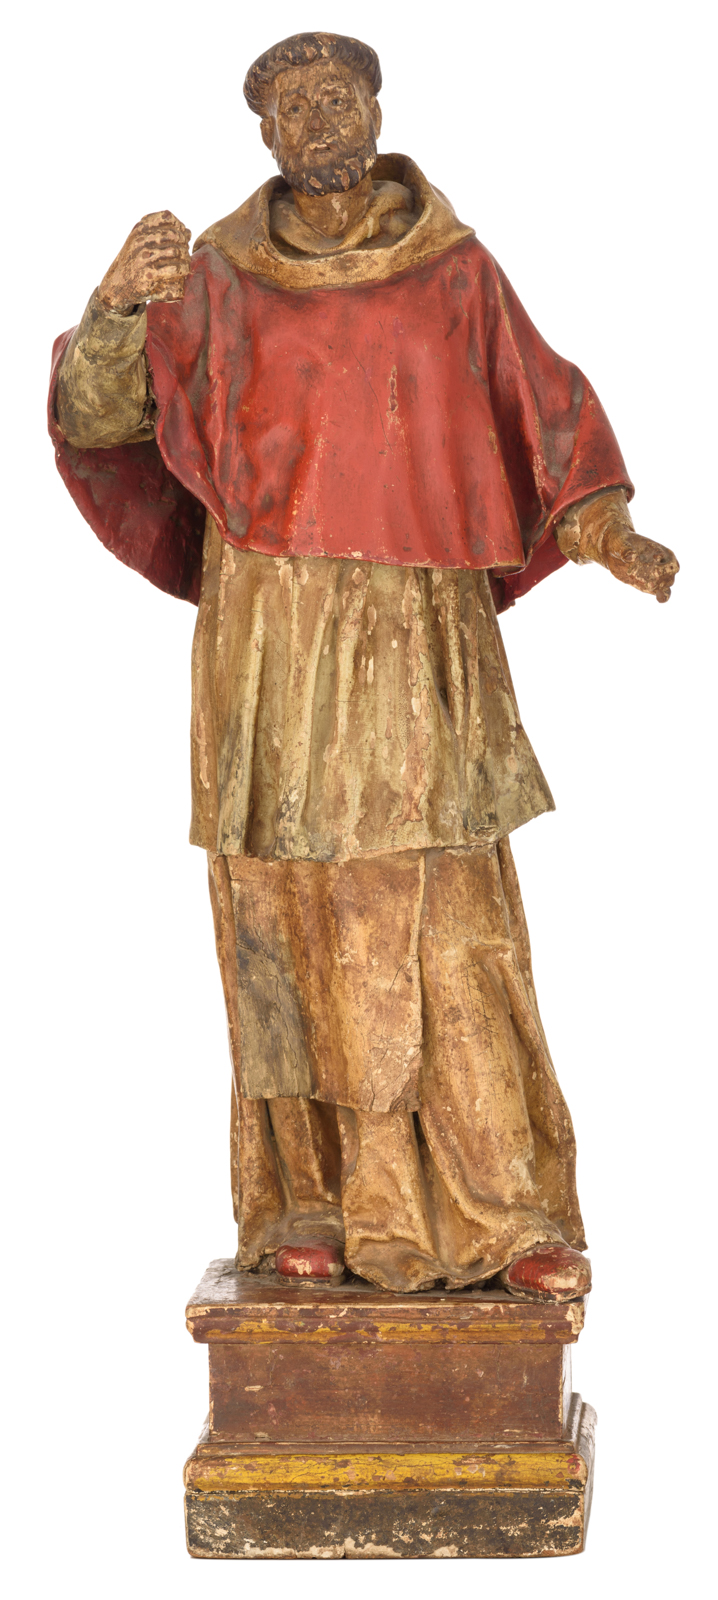 A standing figure of the founder of a monastic order with polychrome paint, limewood and paper-maché